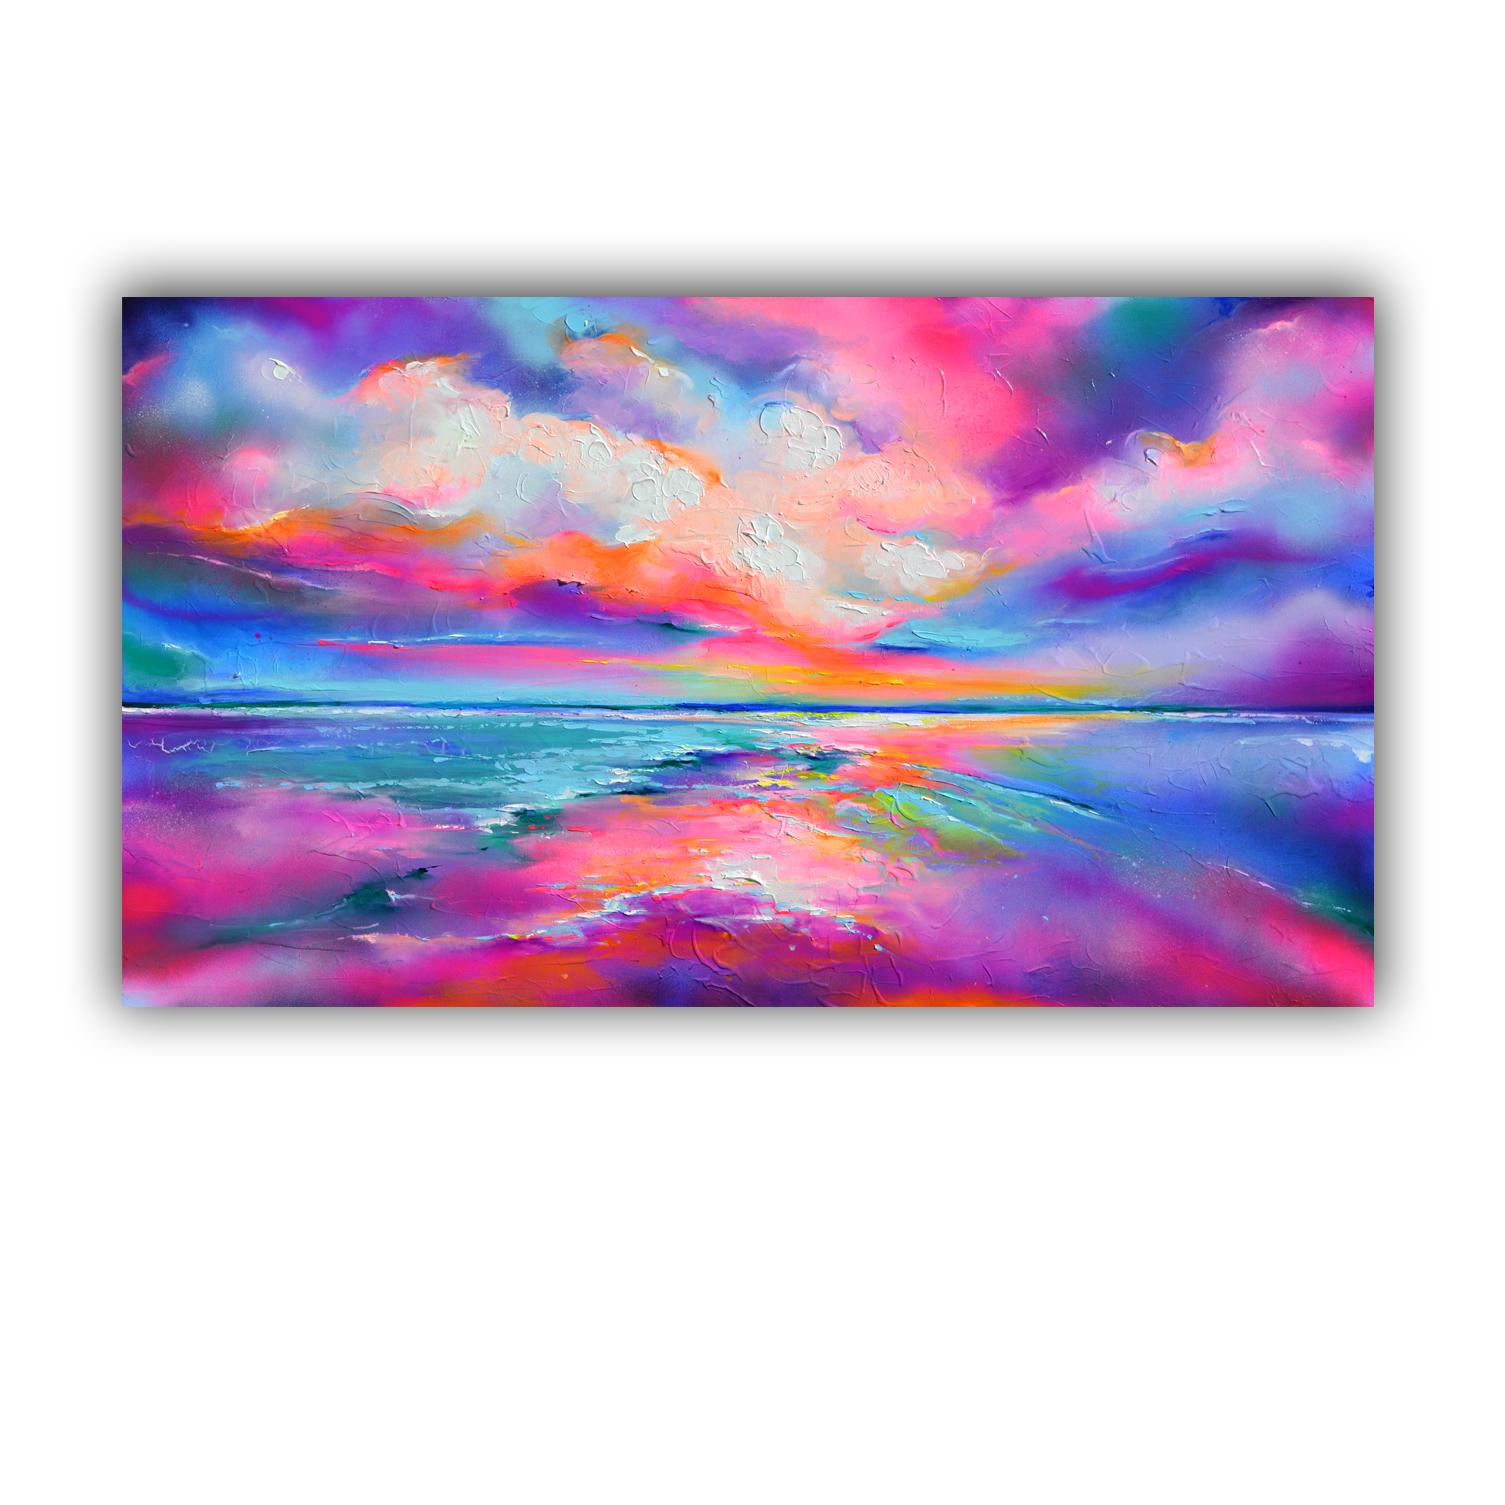 READY TO HANG with the edges painted.

A beautiful modern landscape, abstract, made with professional varnished acrylics and Amsterdam acrylic sprays on stretched heavy canvas.

I ship this marvellous artwork ready to hang.

Dimensions: 140X80X2 cm